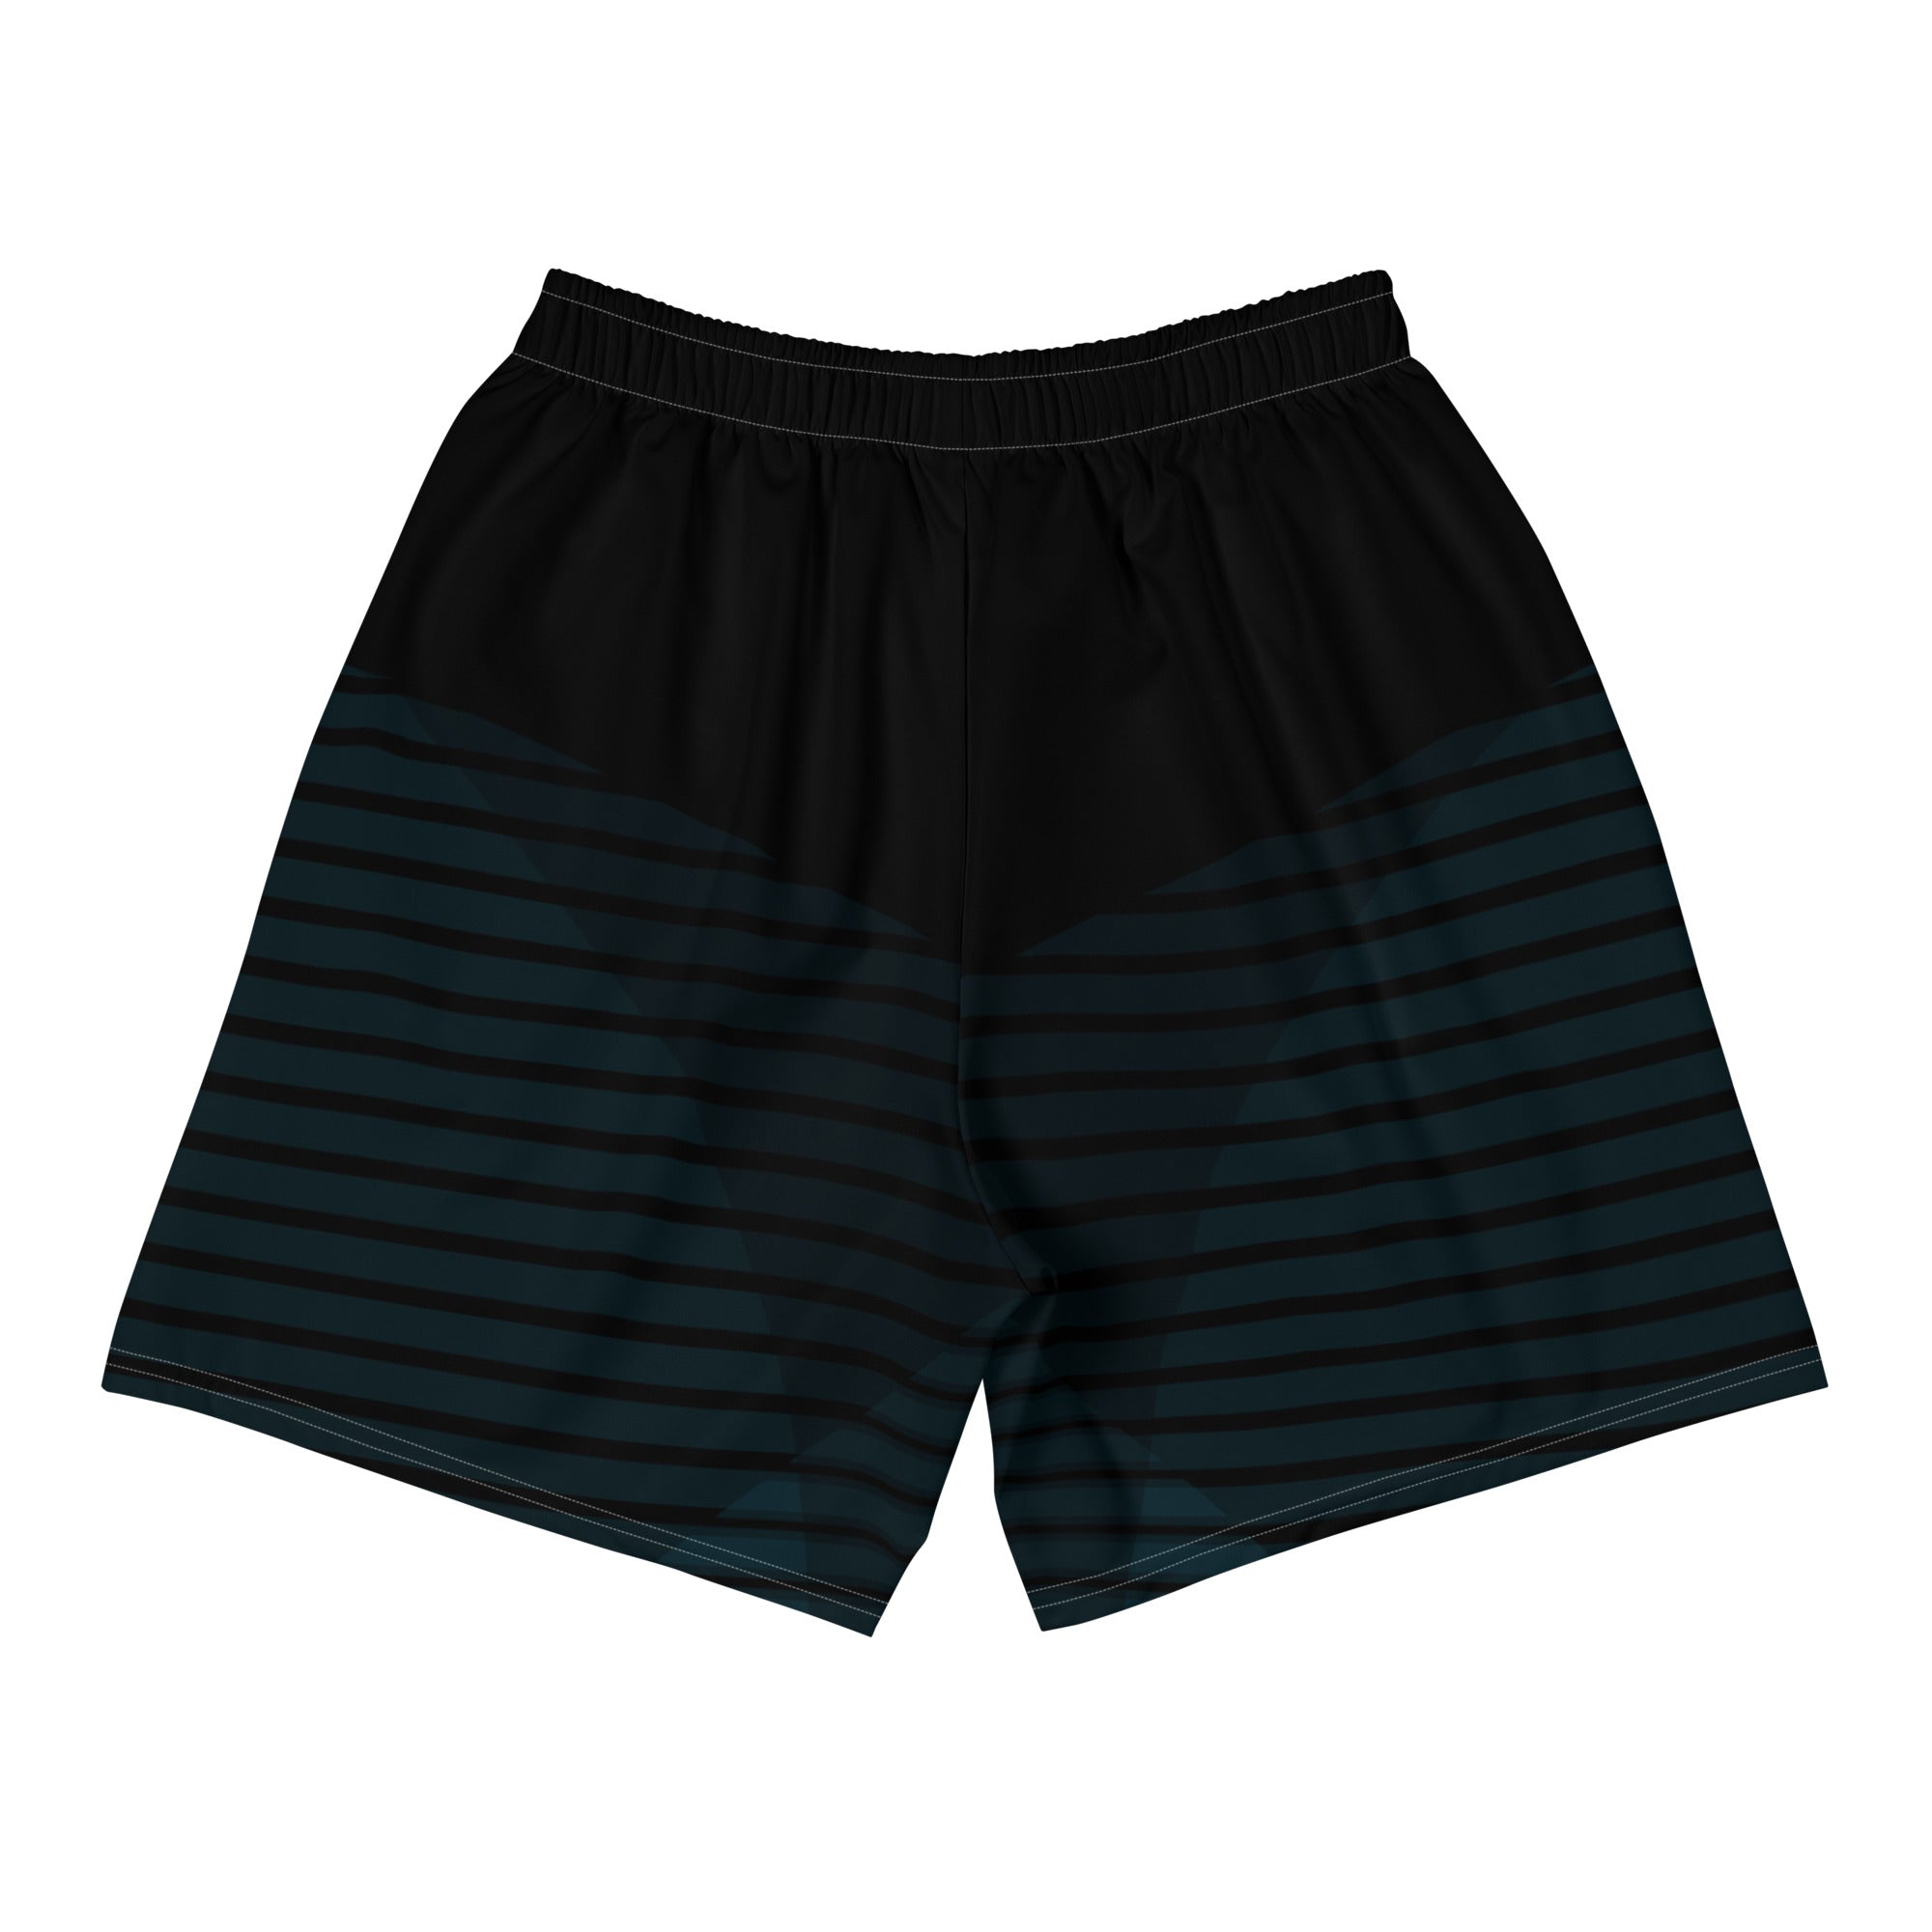 Whalers Men's Athletic Shorts